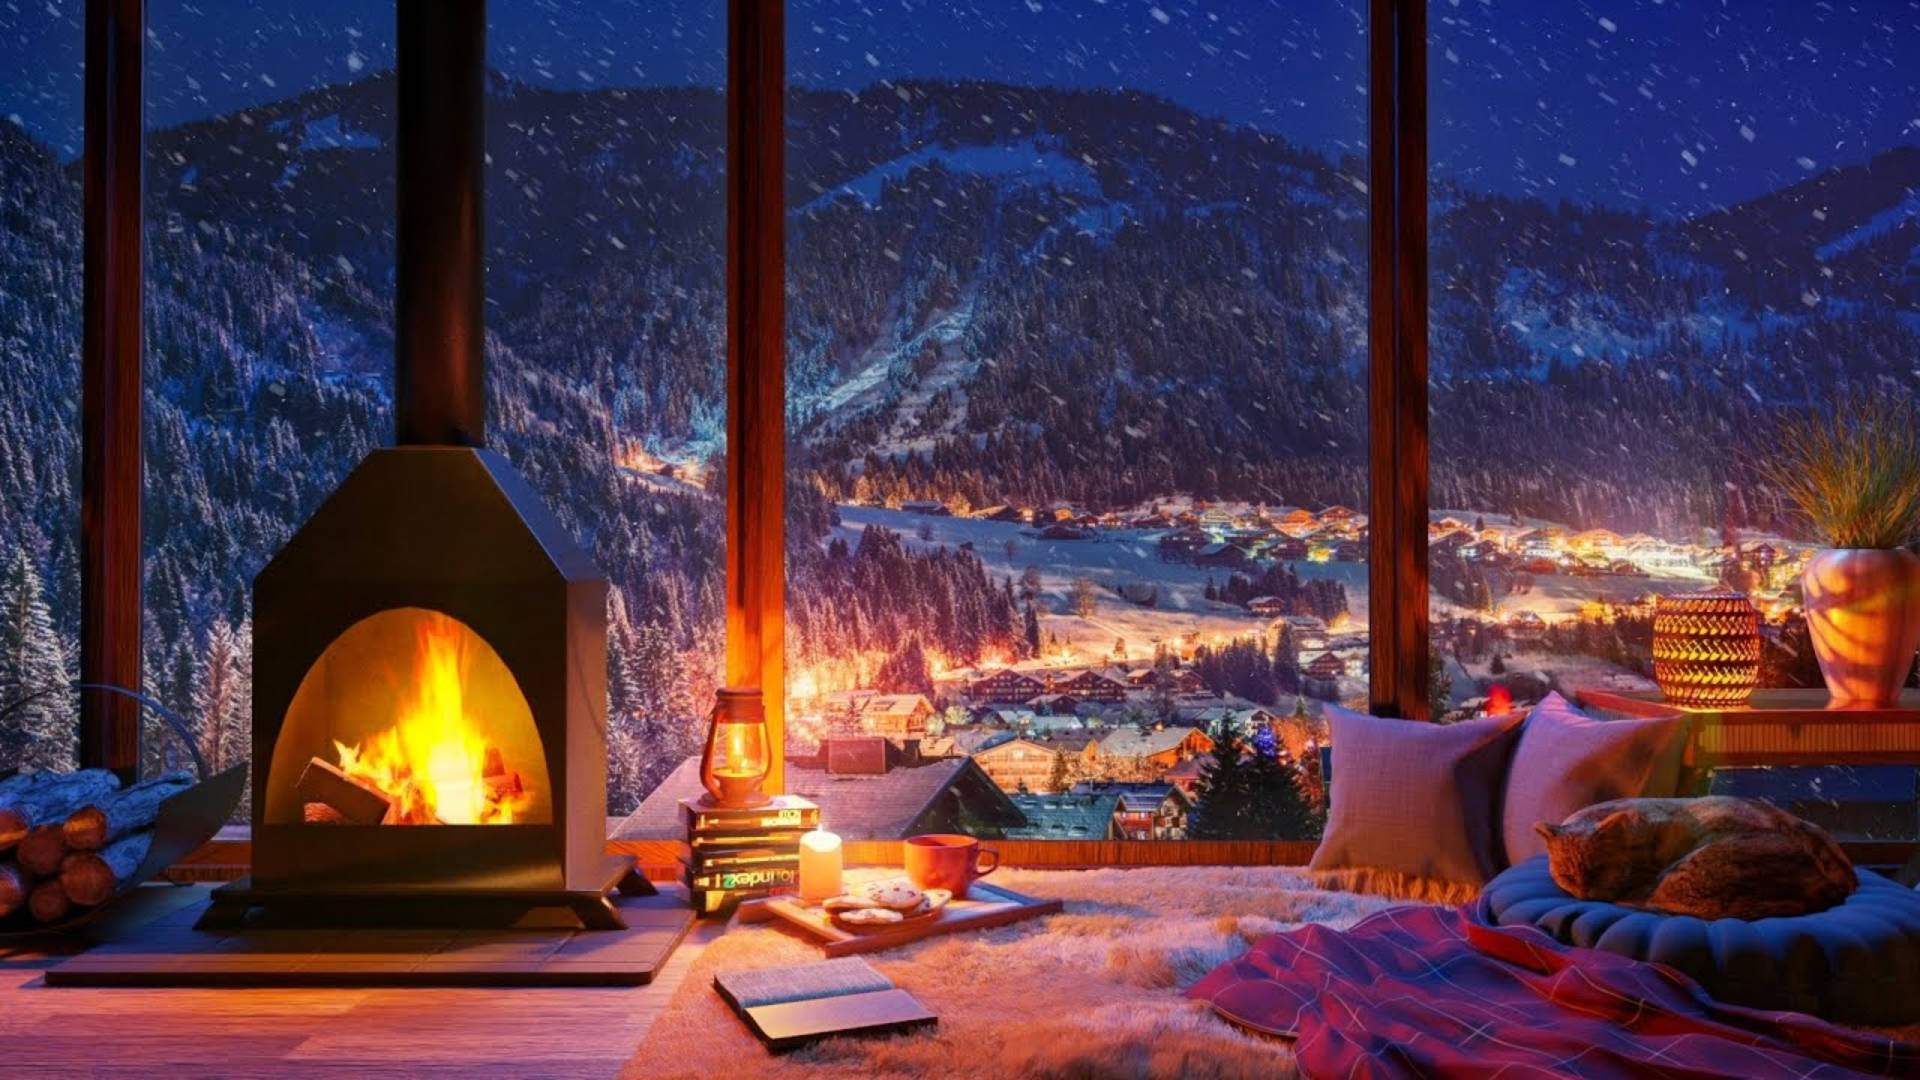 Download Cozy Winter Evening Near The Fireplace Wallpaper 